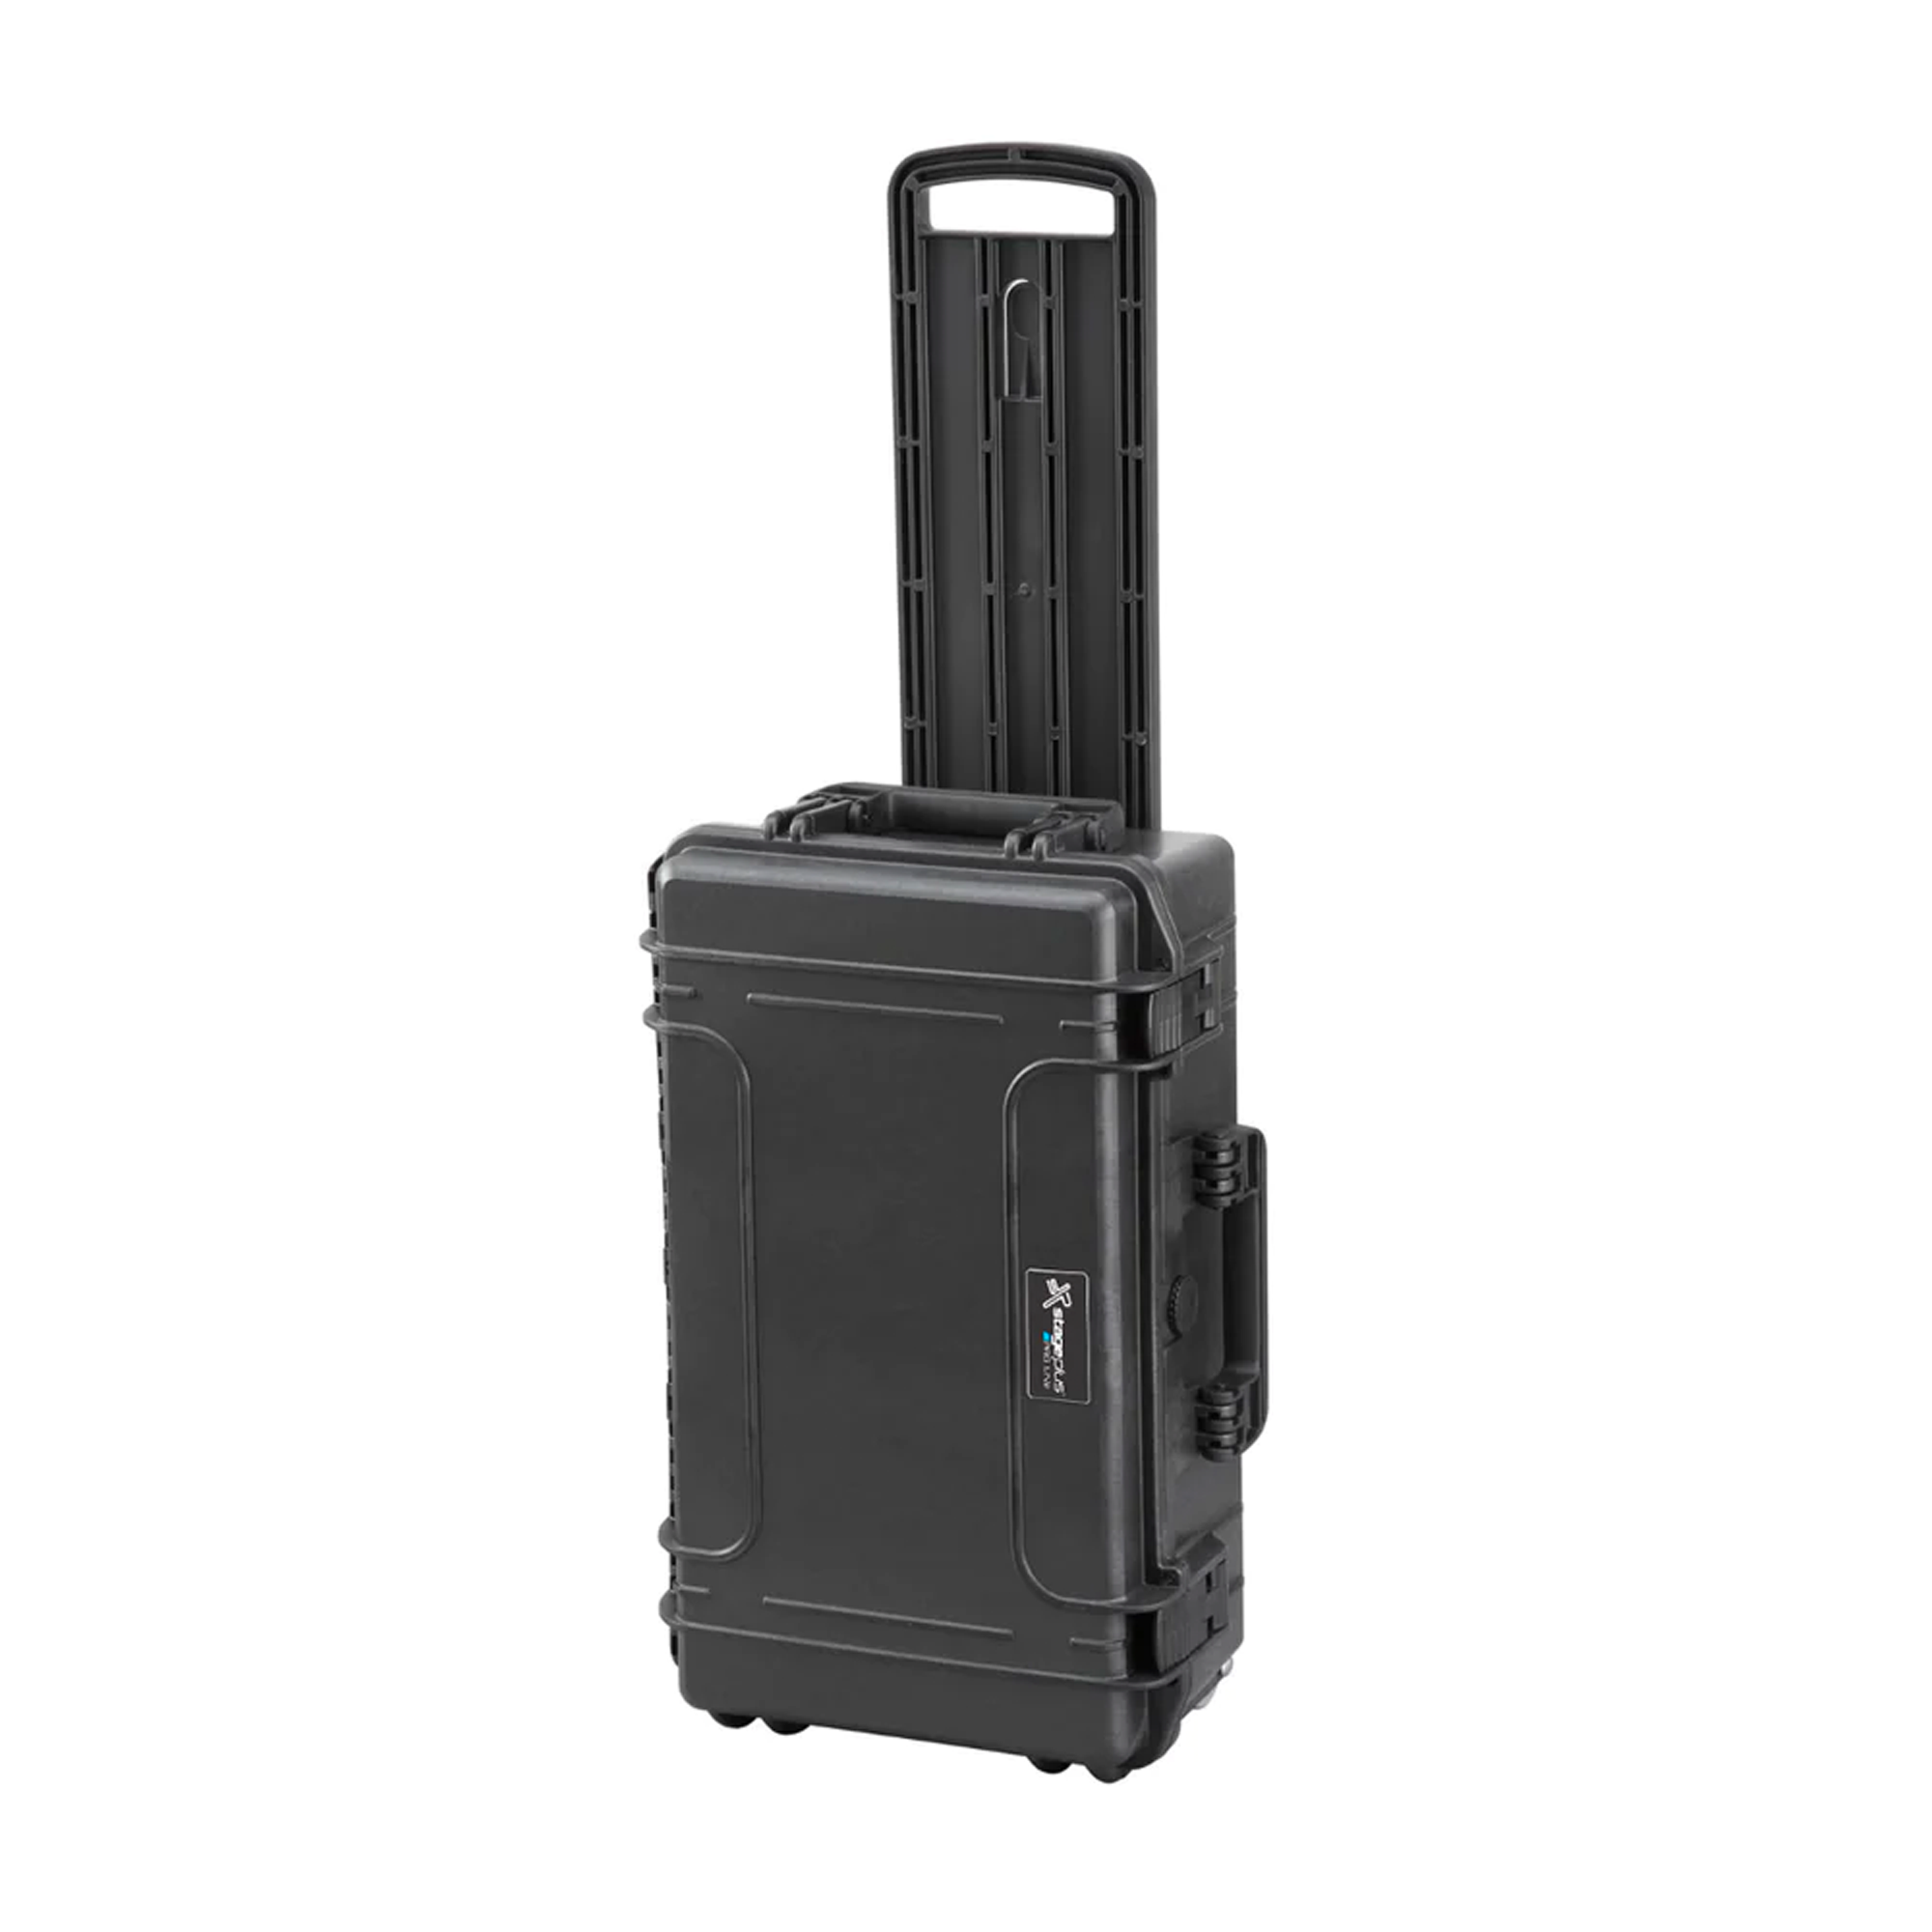 Stage Plus PRO 520CAMORGTR Black Trolley Case, Padded Dividers + Lid Organizer, ID: L520xW290xH200mm